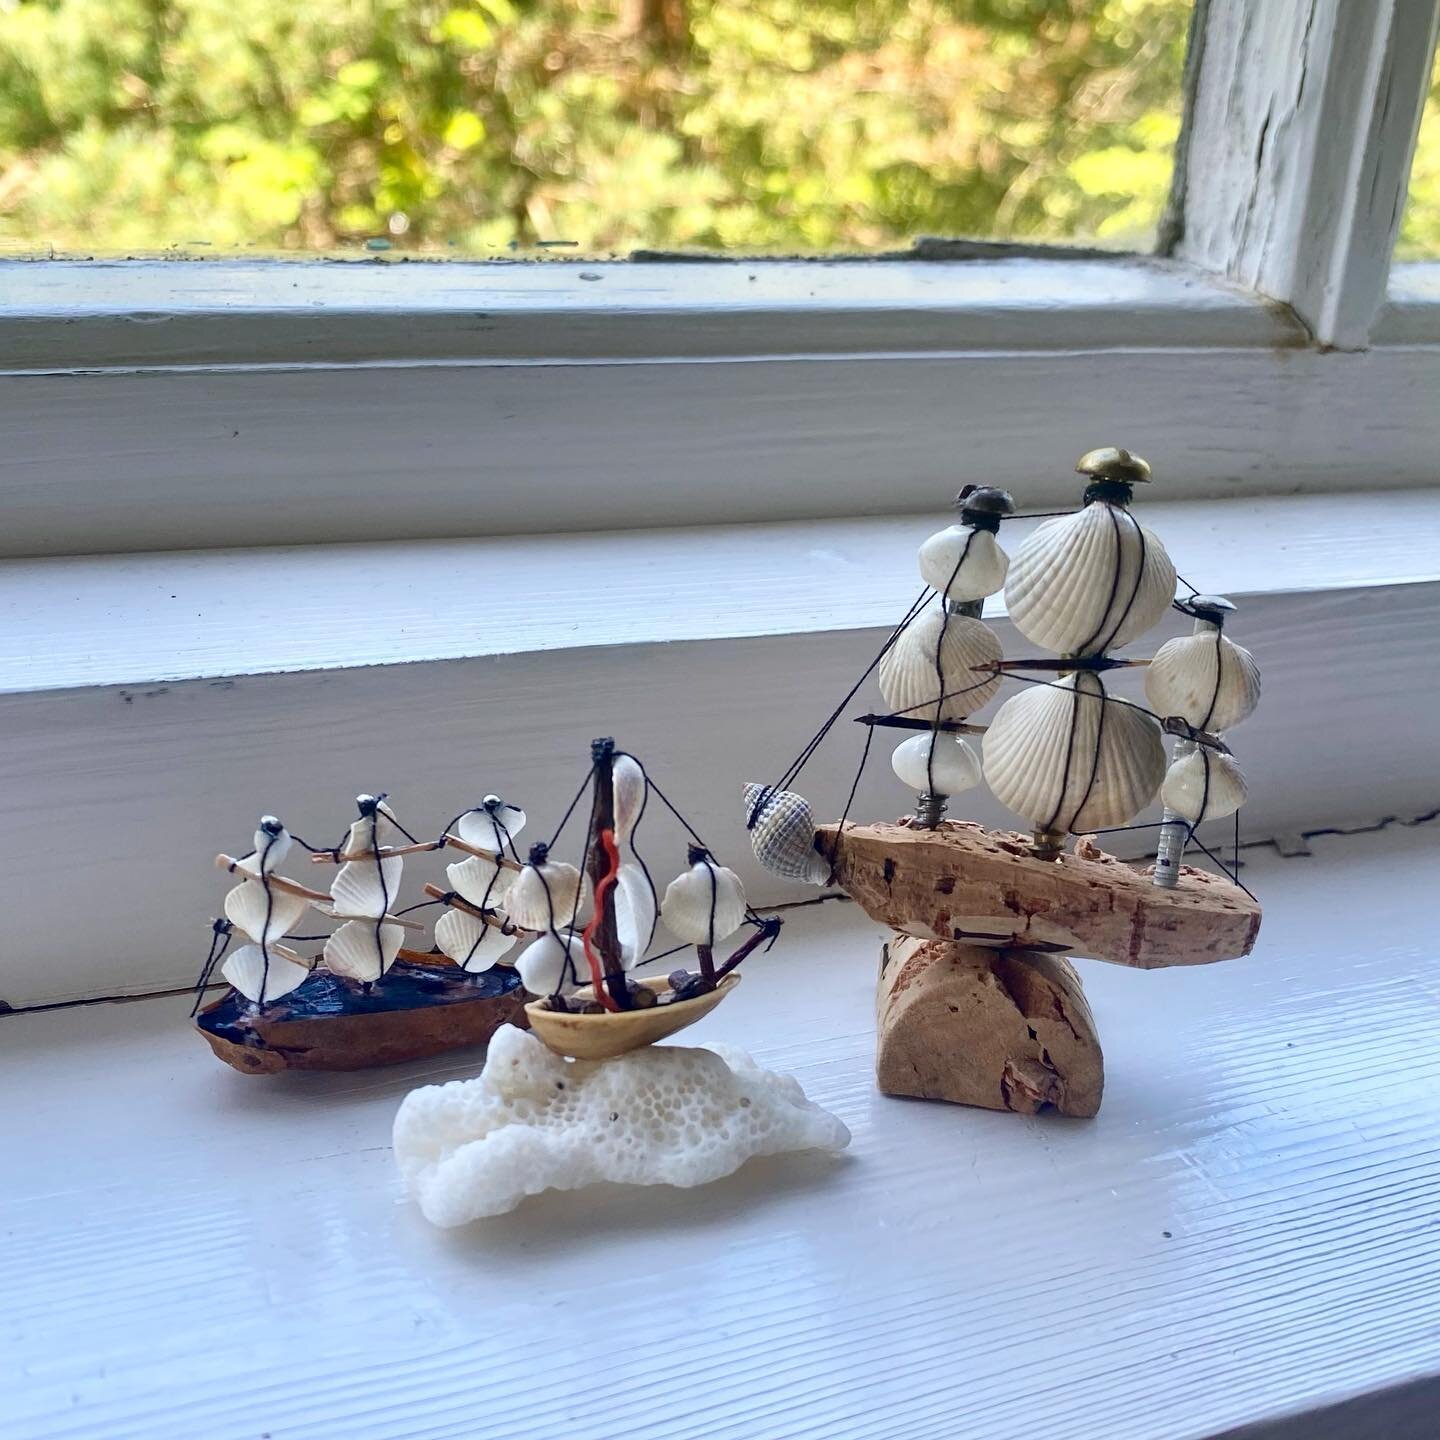 Some boats I made this summer 🐚